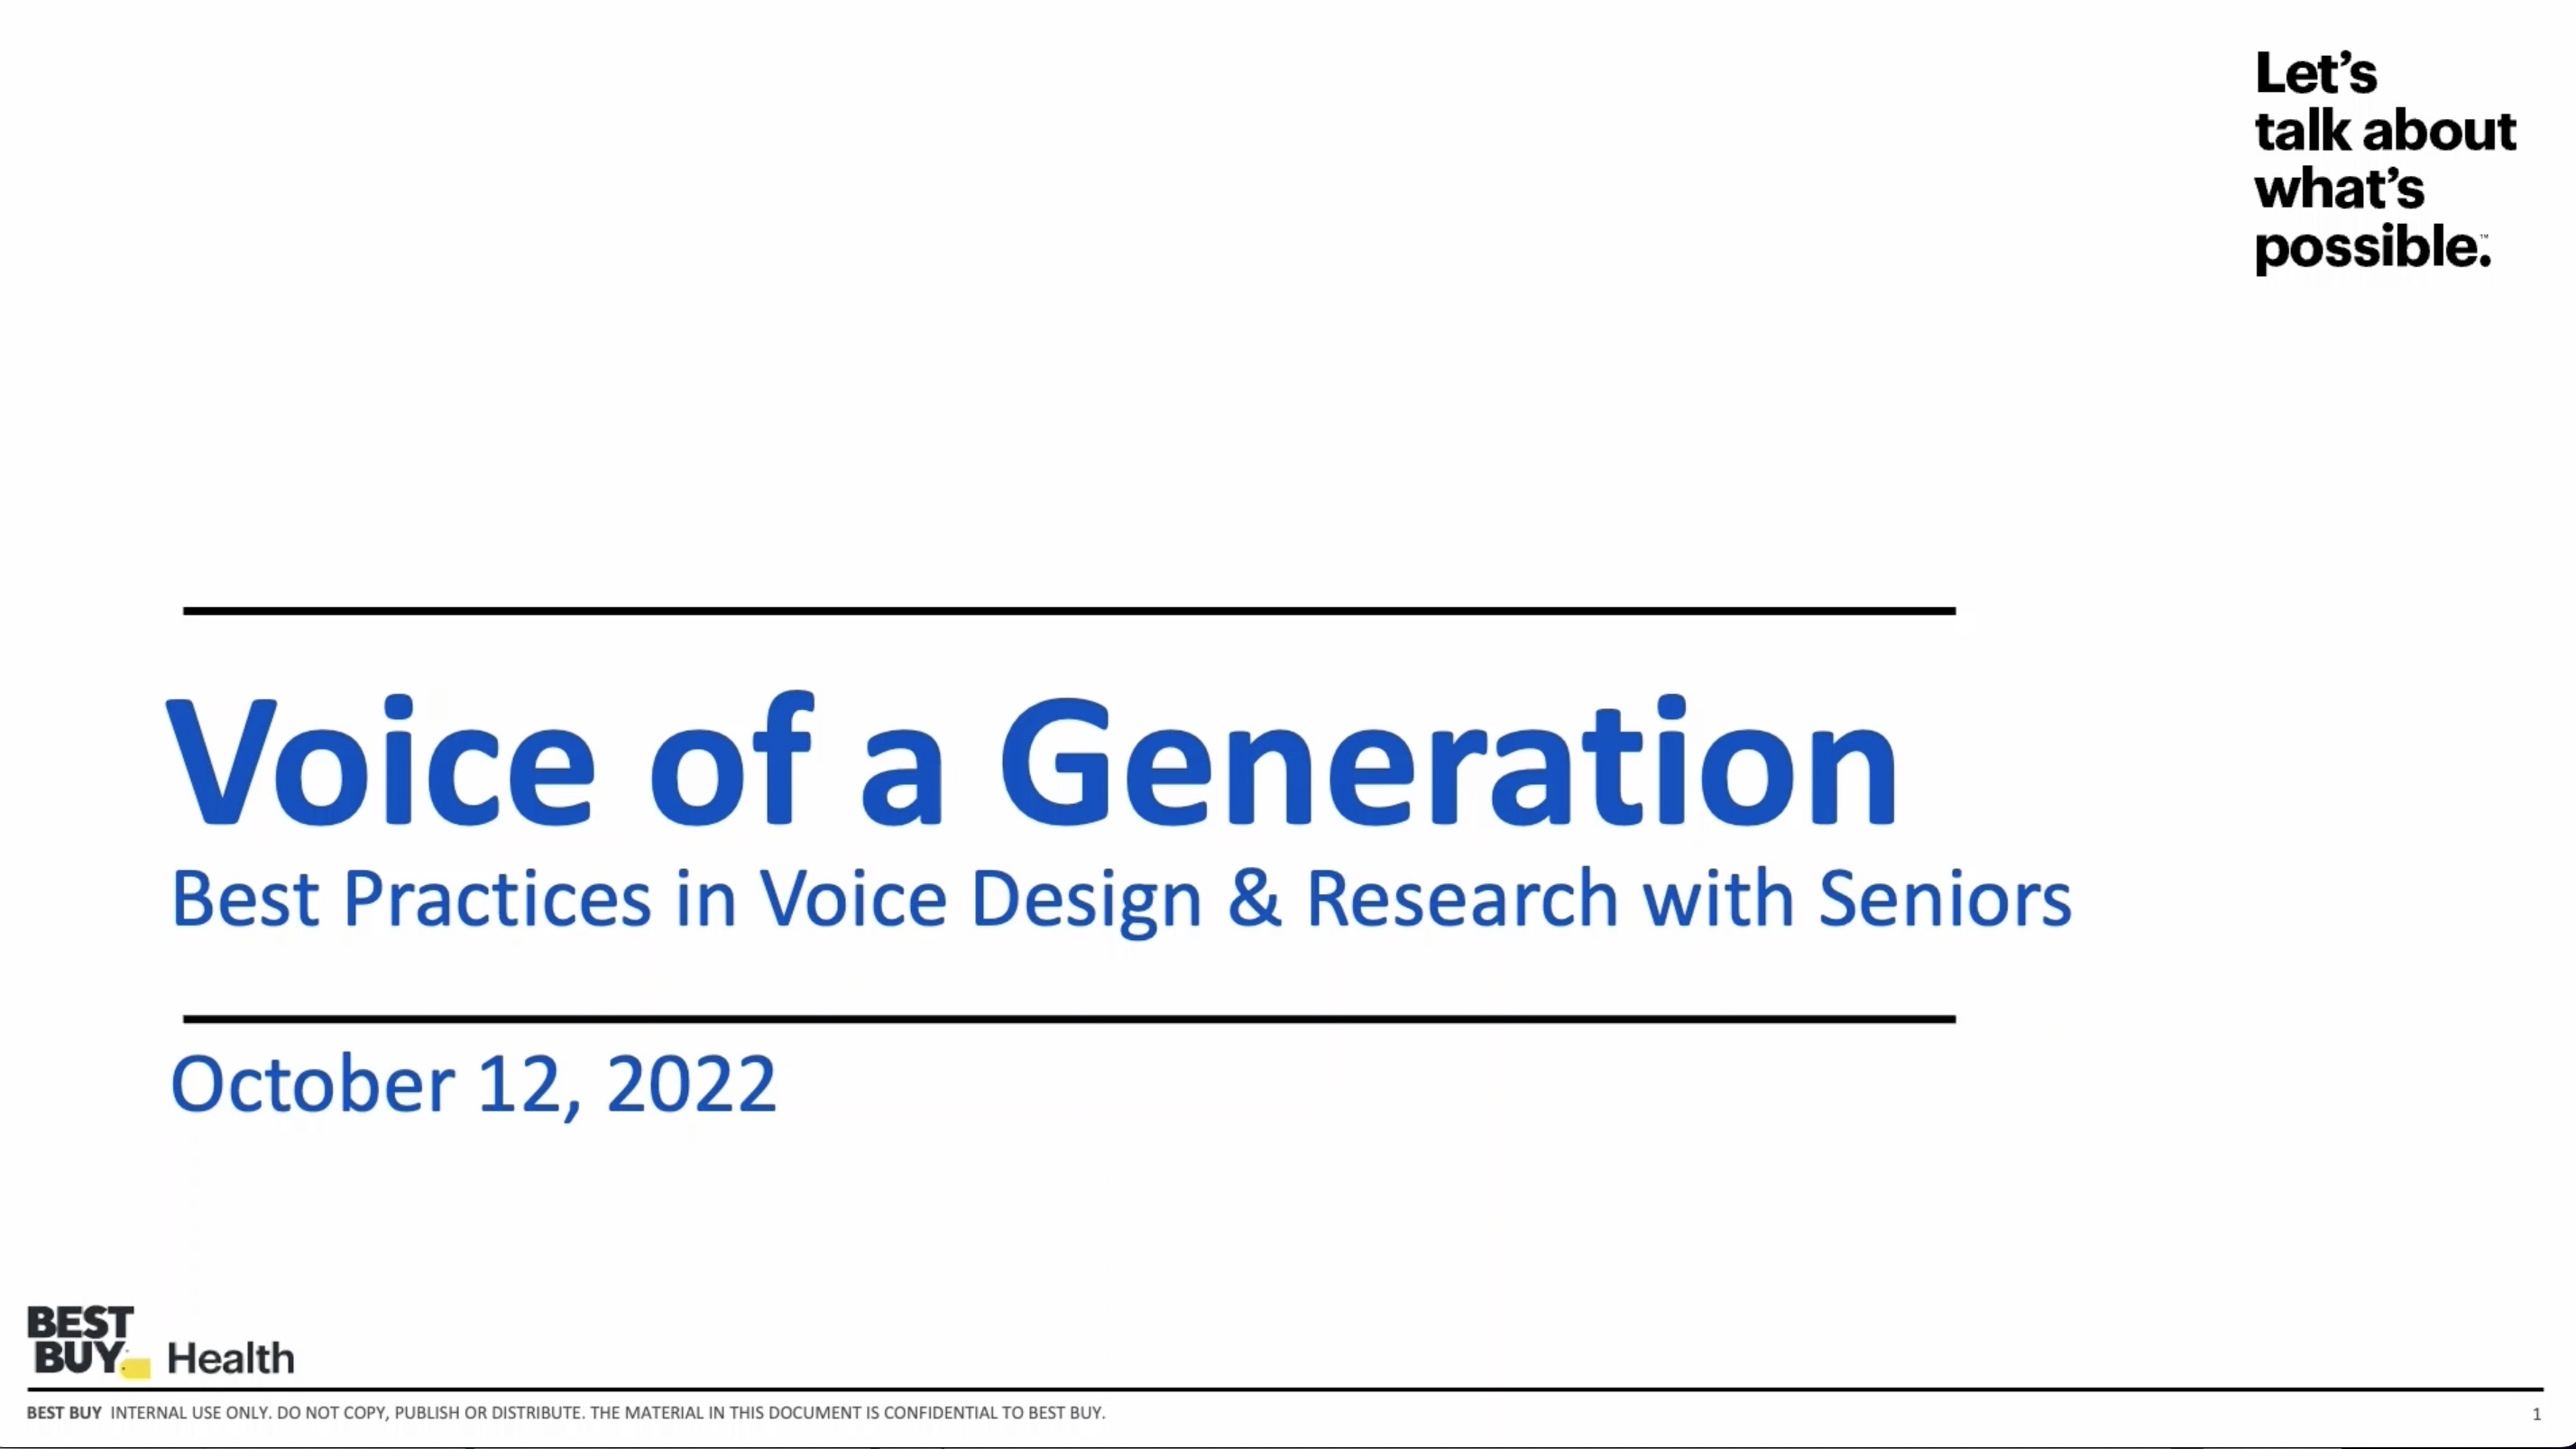 VOICE22 | Voice of a Generation: Best Practices in Voice Research and Design with Seniors | Yin-Juei Chang, Kimberly Johnson, & Ben Allen-Kingsland